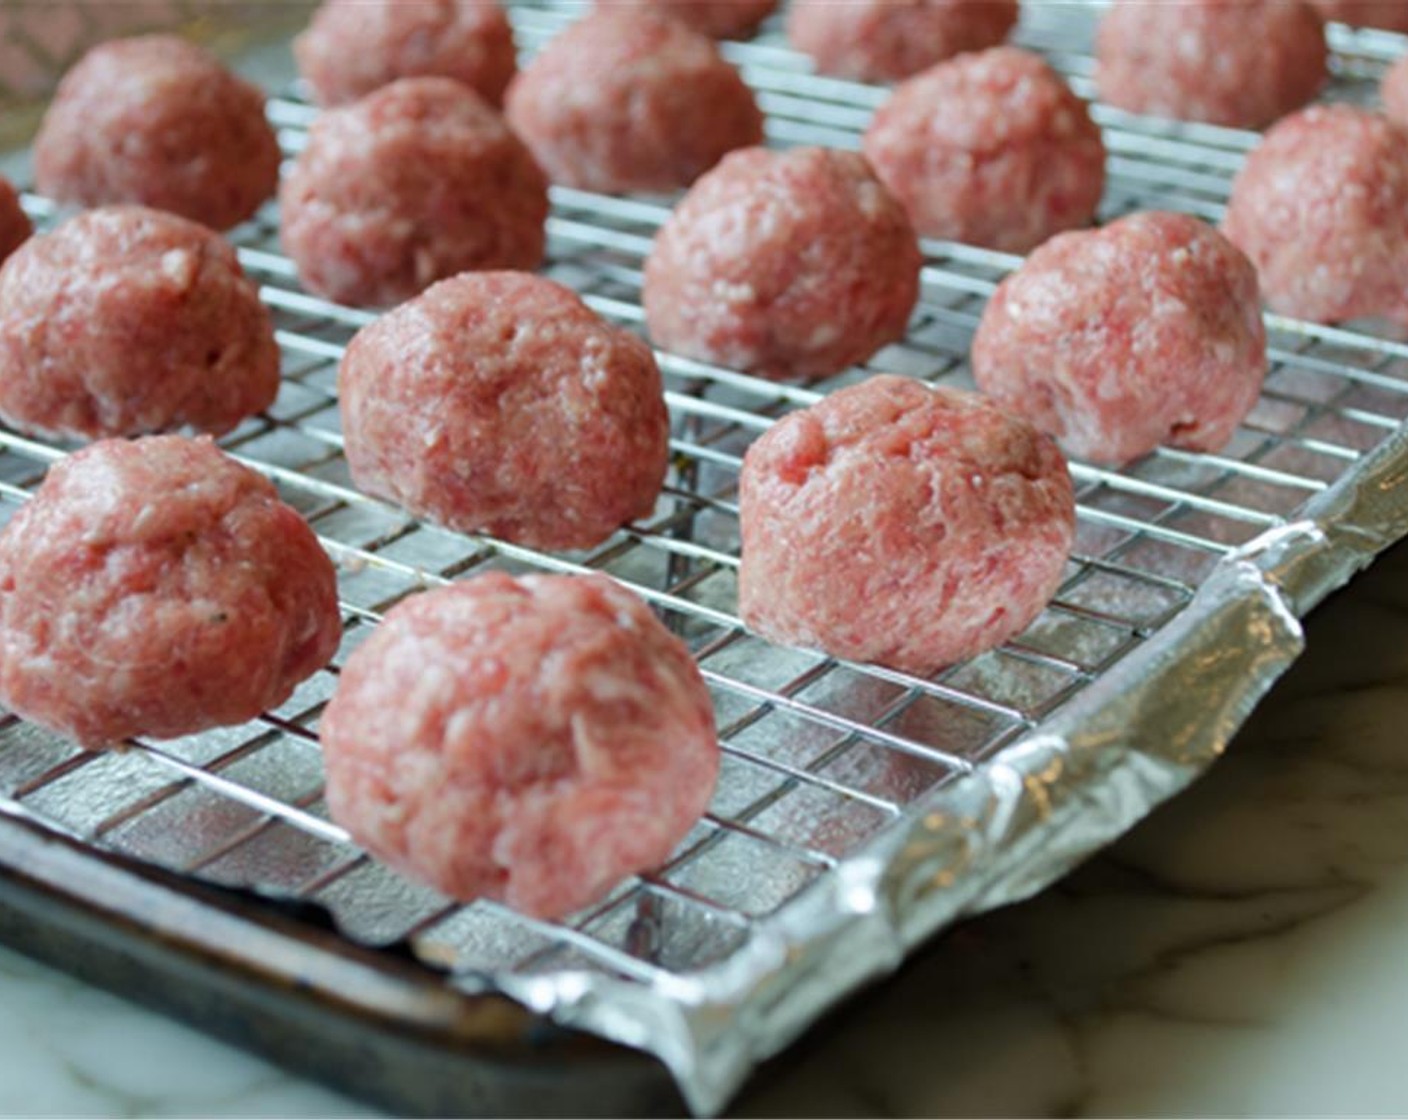 step 7 Using moistened hands (it's sticky and wet hands help; keep wetting them as you go), form the meat mixture into tablespoon-size round meatballs and place on the prepared rack. Bake for about 20 minutes, until just done.